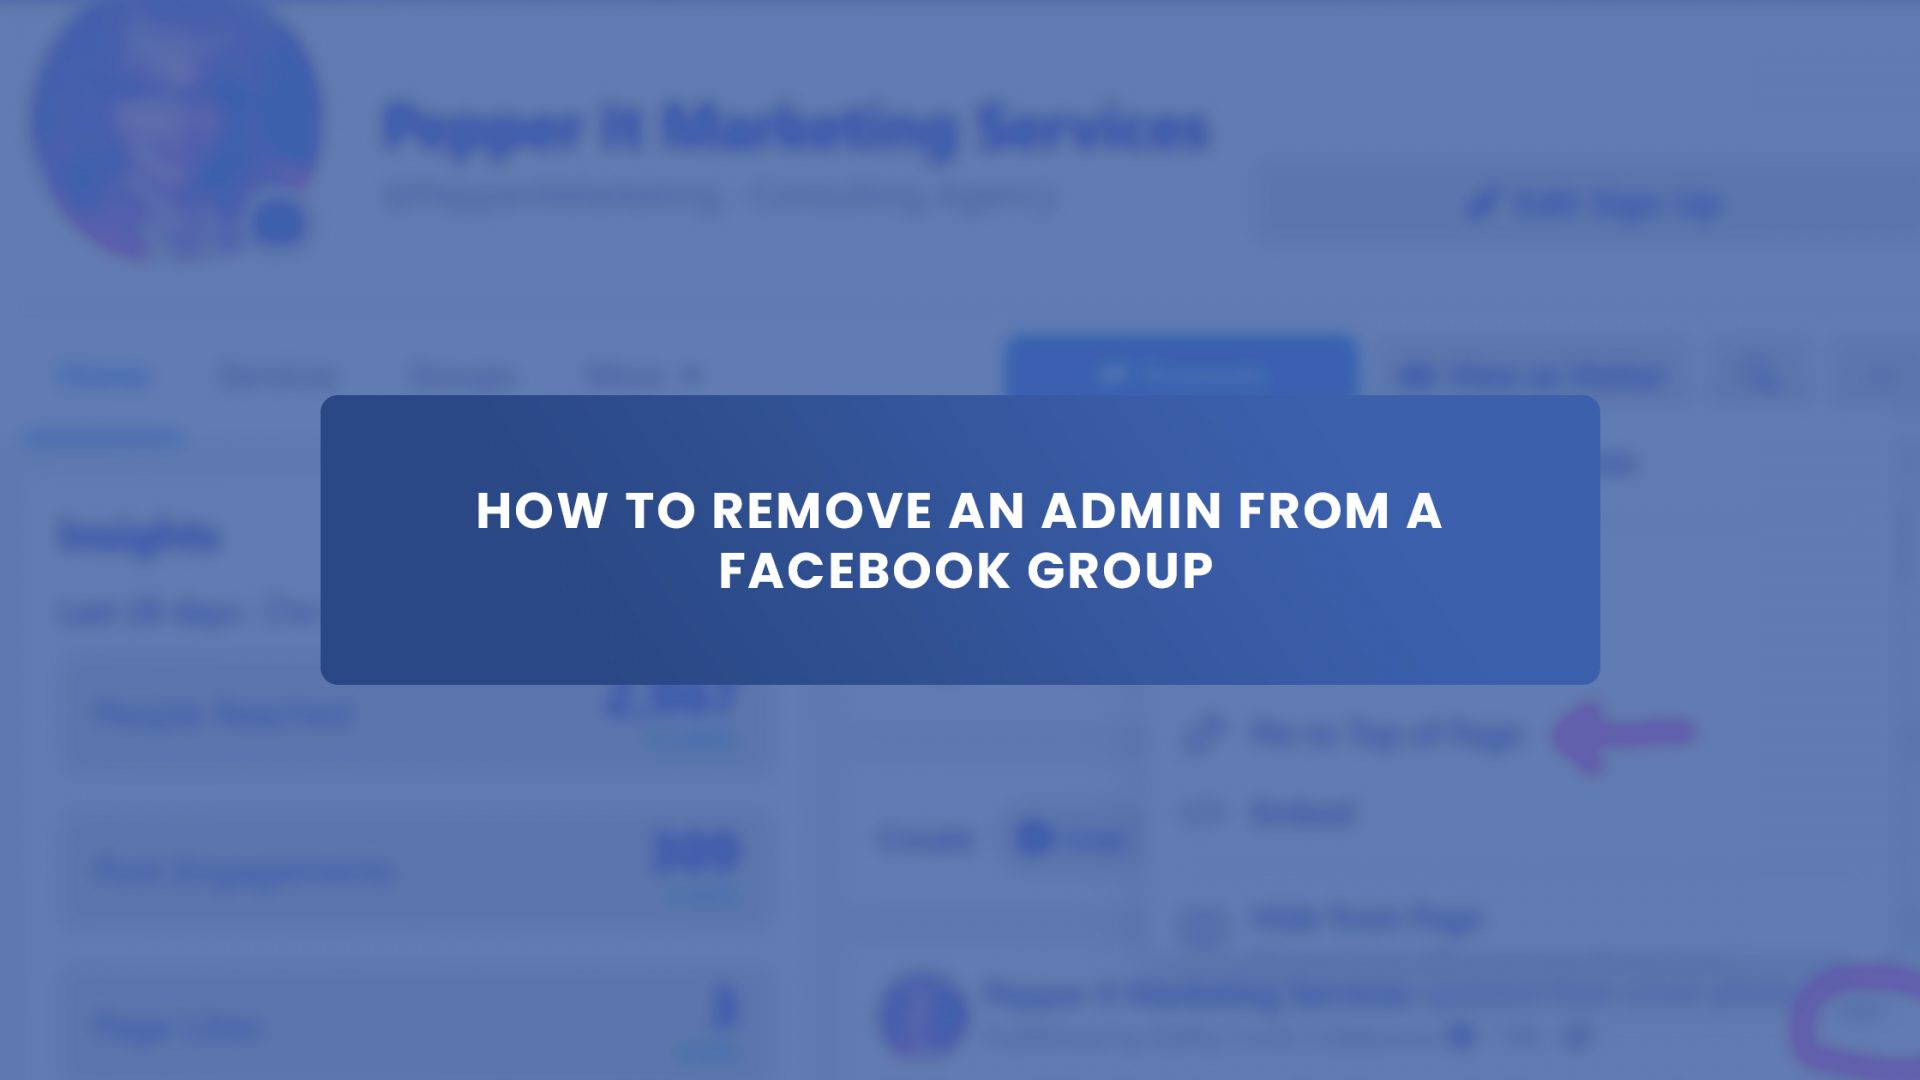 How To Remove An Admin From A Facebook Group